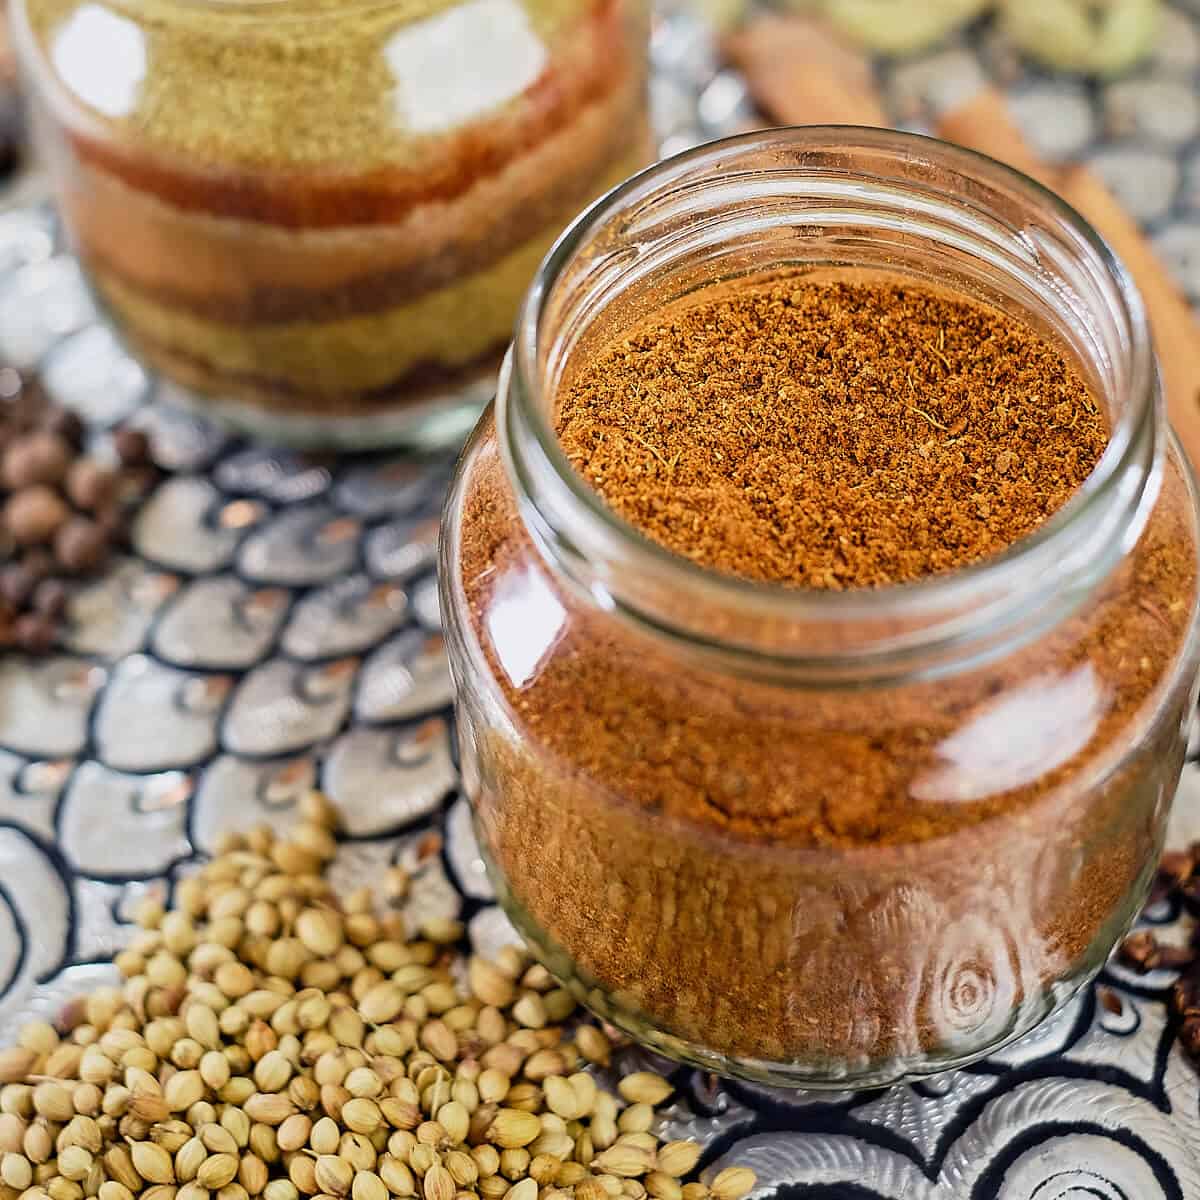 For the Most Even Seasoning, Use a Spice Strainer